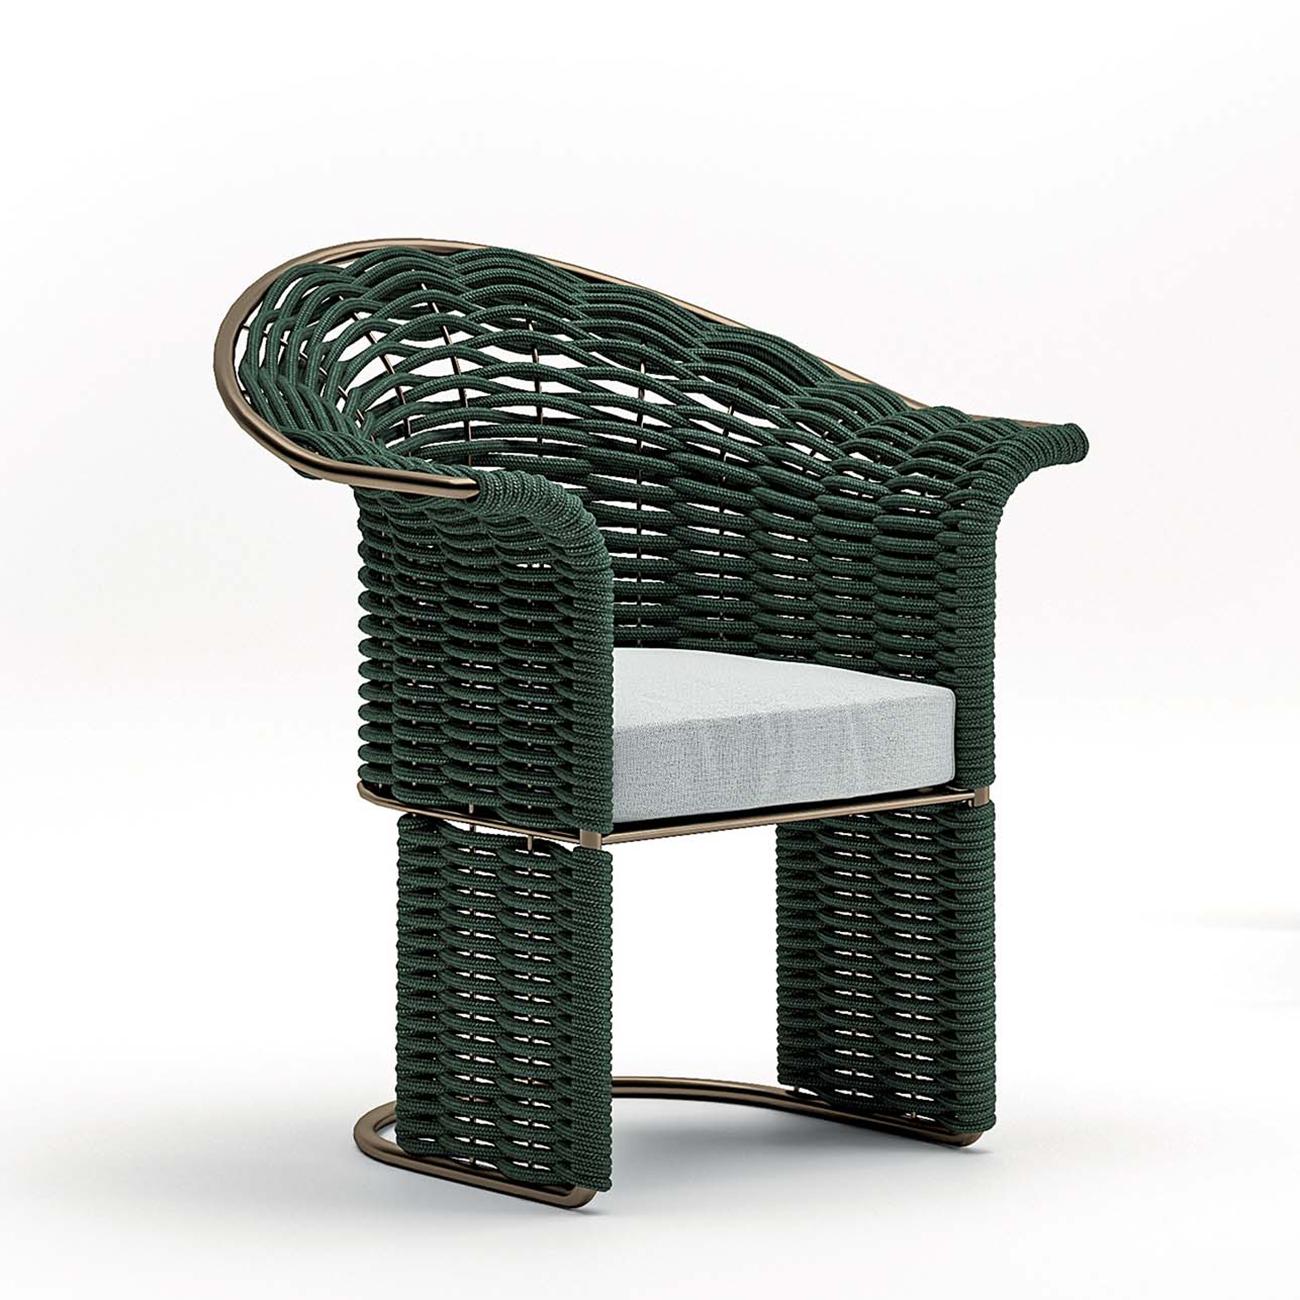 Chair Dawn outdoor with frame structure in stainless steel
in bronze finish, with cushion seat upholstered and covered 
with high quality outdoor fabric. Backrest, armrests and base
made with woven green rope.